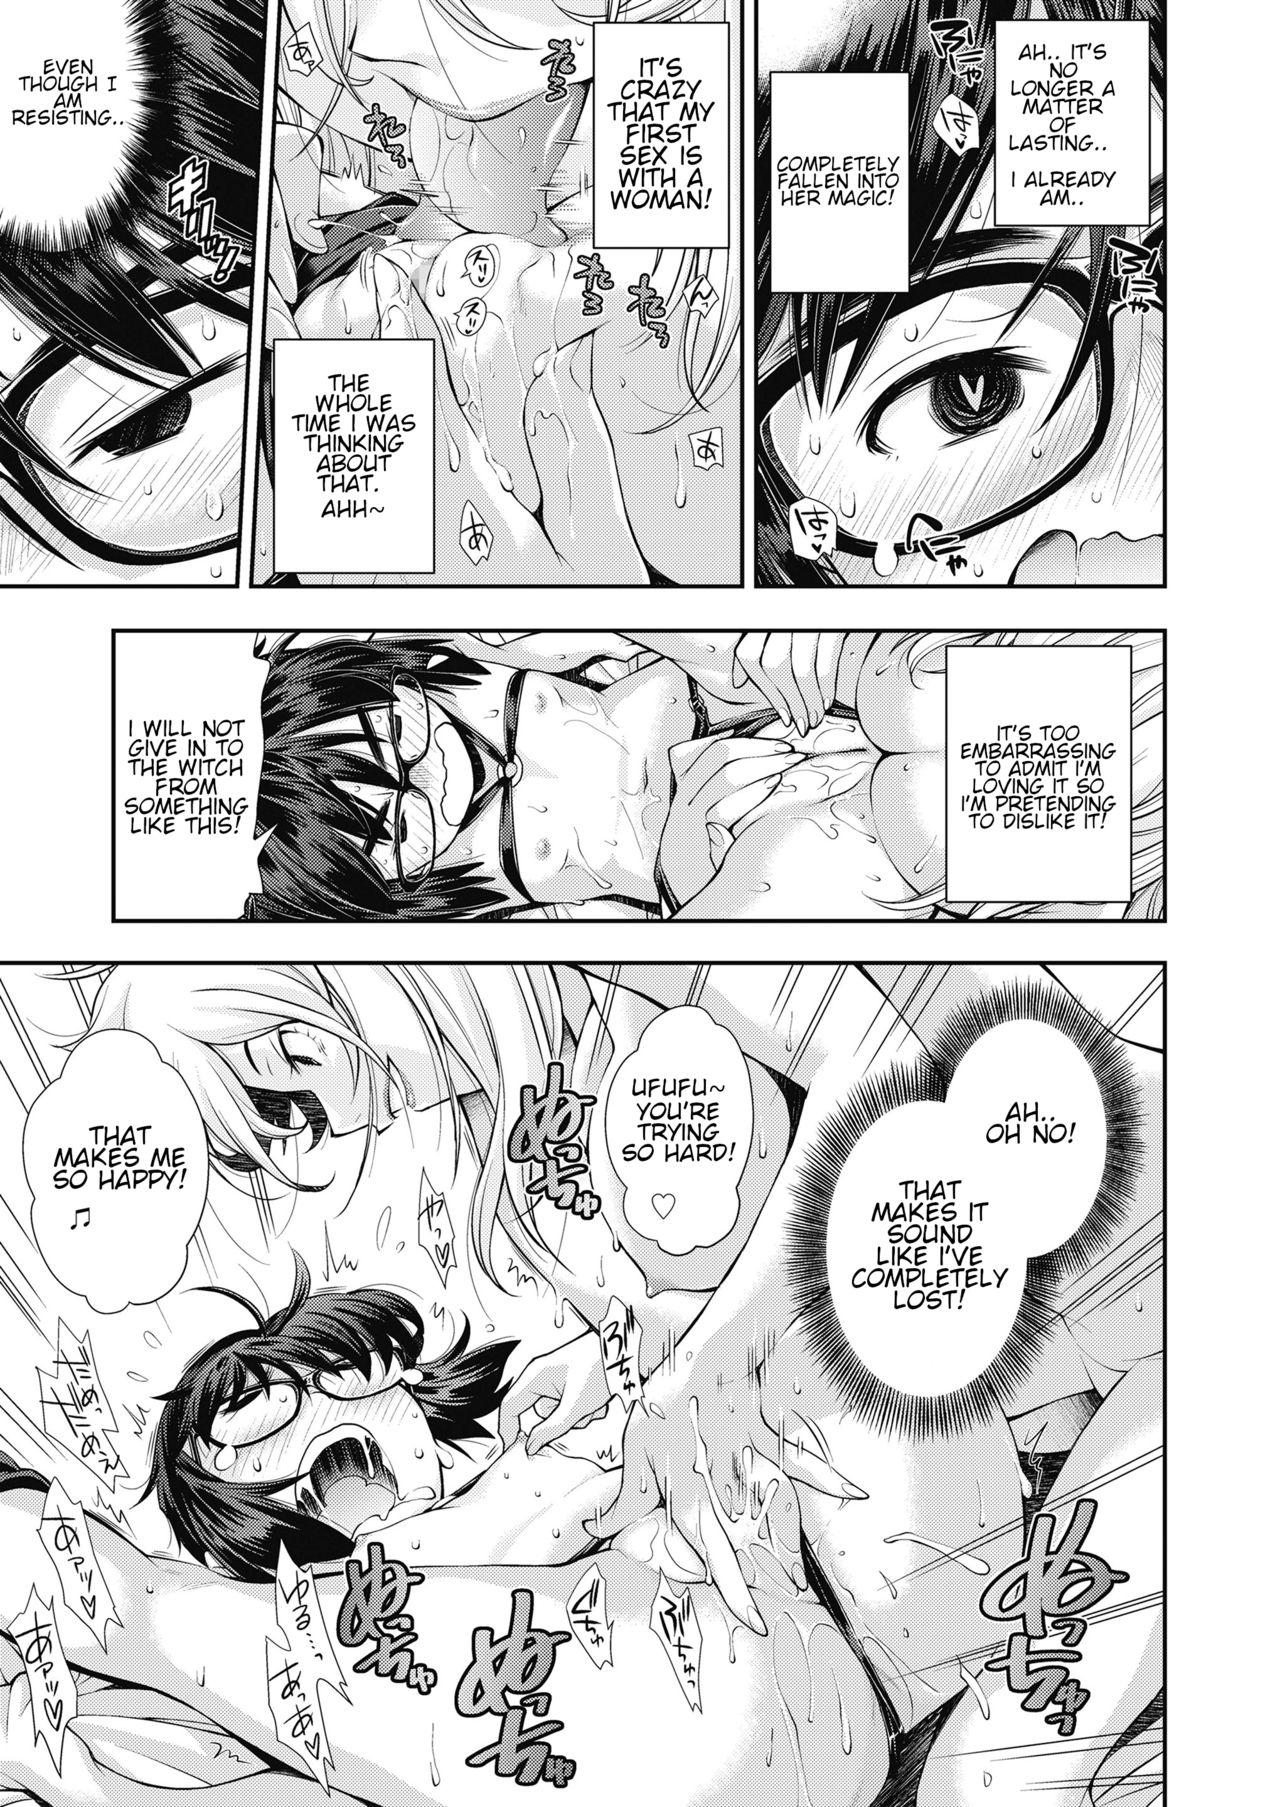 Twink Manken JC Isekai de Yuusha ni Naru mo Les to Shokushu ni Otsu | I became a brave loli warrior in another world but fell prey to a lesbian and tentacles Special Locations - Page 11